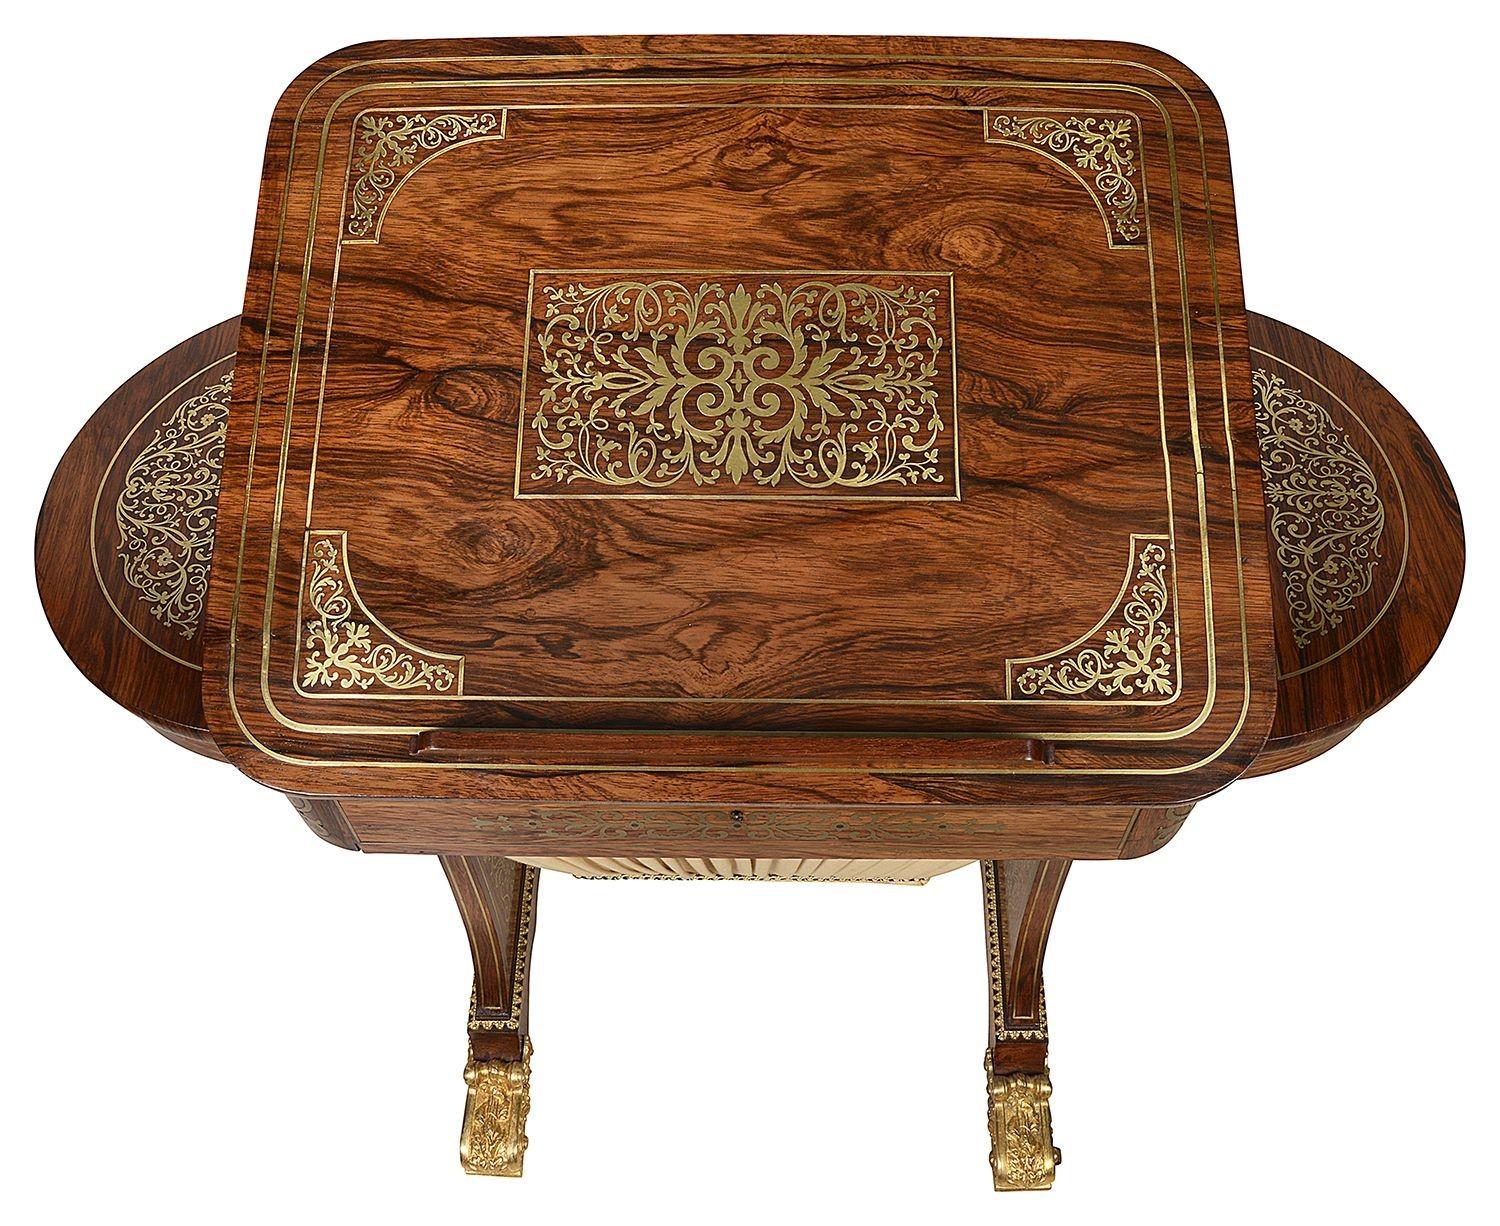 19th Century Regency Period Brass Inlaid Side Table, Attributed to John Maclean, circa 1820 For Sale